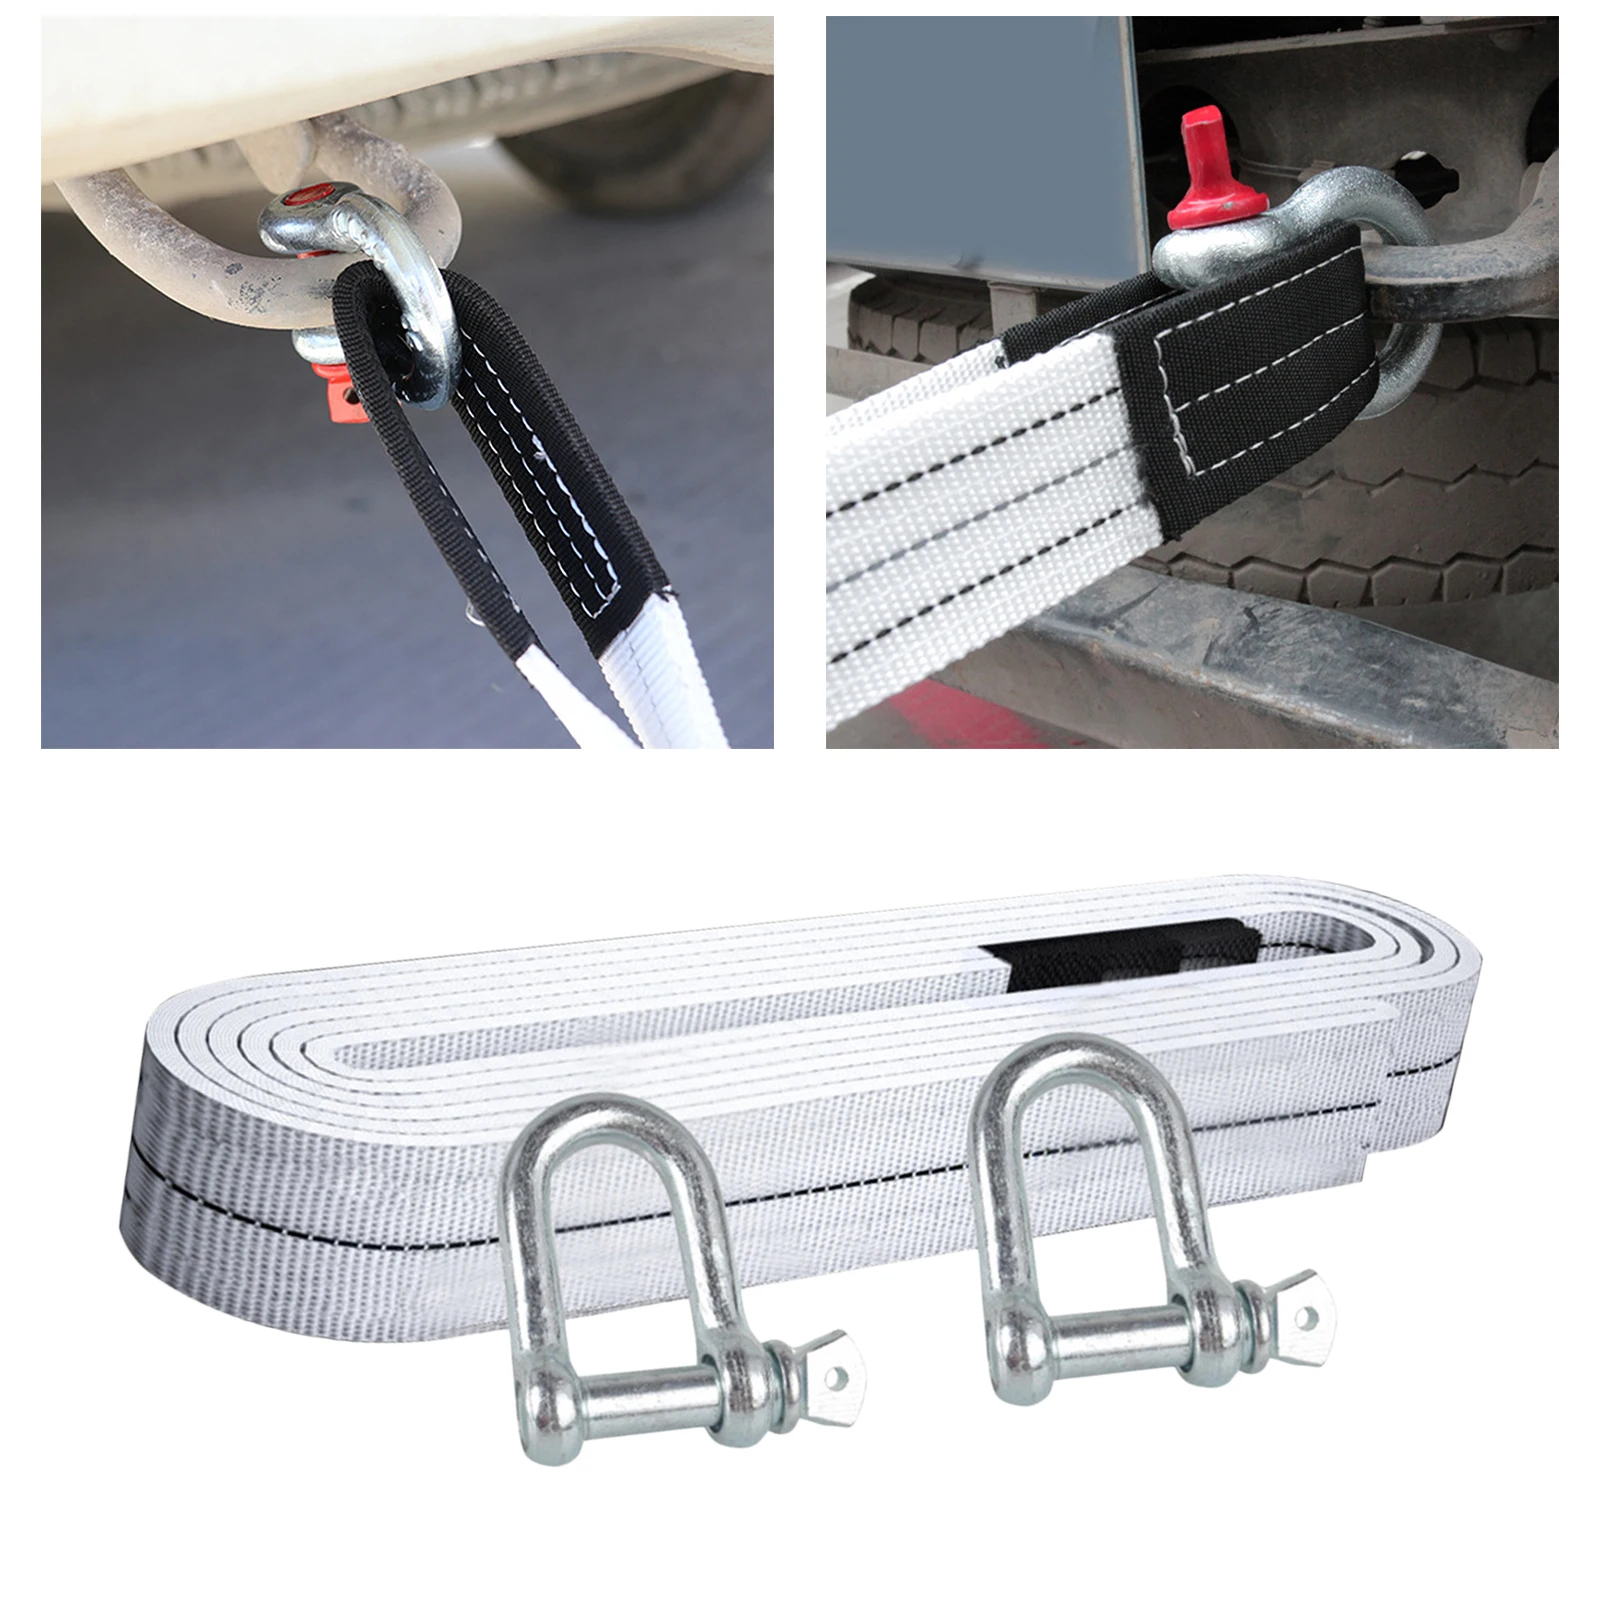 Trailer Winch Strap with Hook Replacement,6 Ton Capacity for Boats, Trailer, , Towing, Heavy Duty Equipment